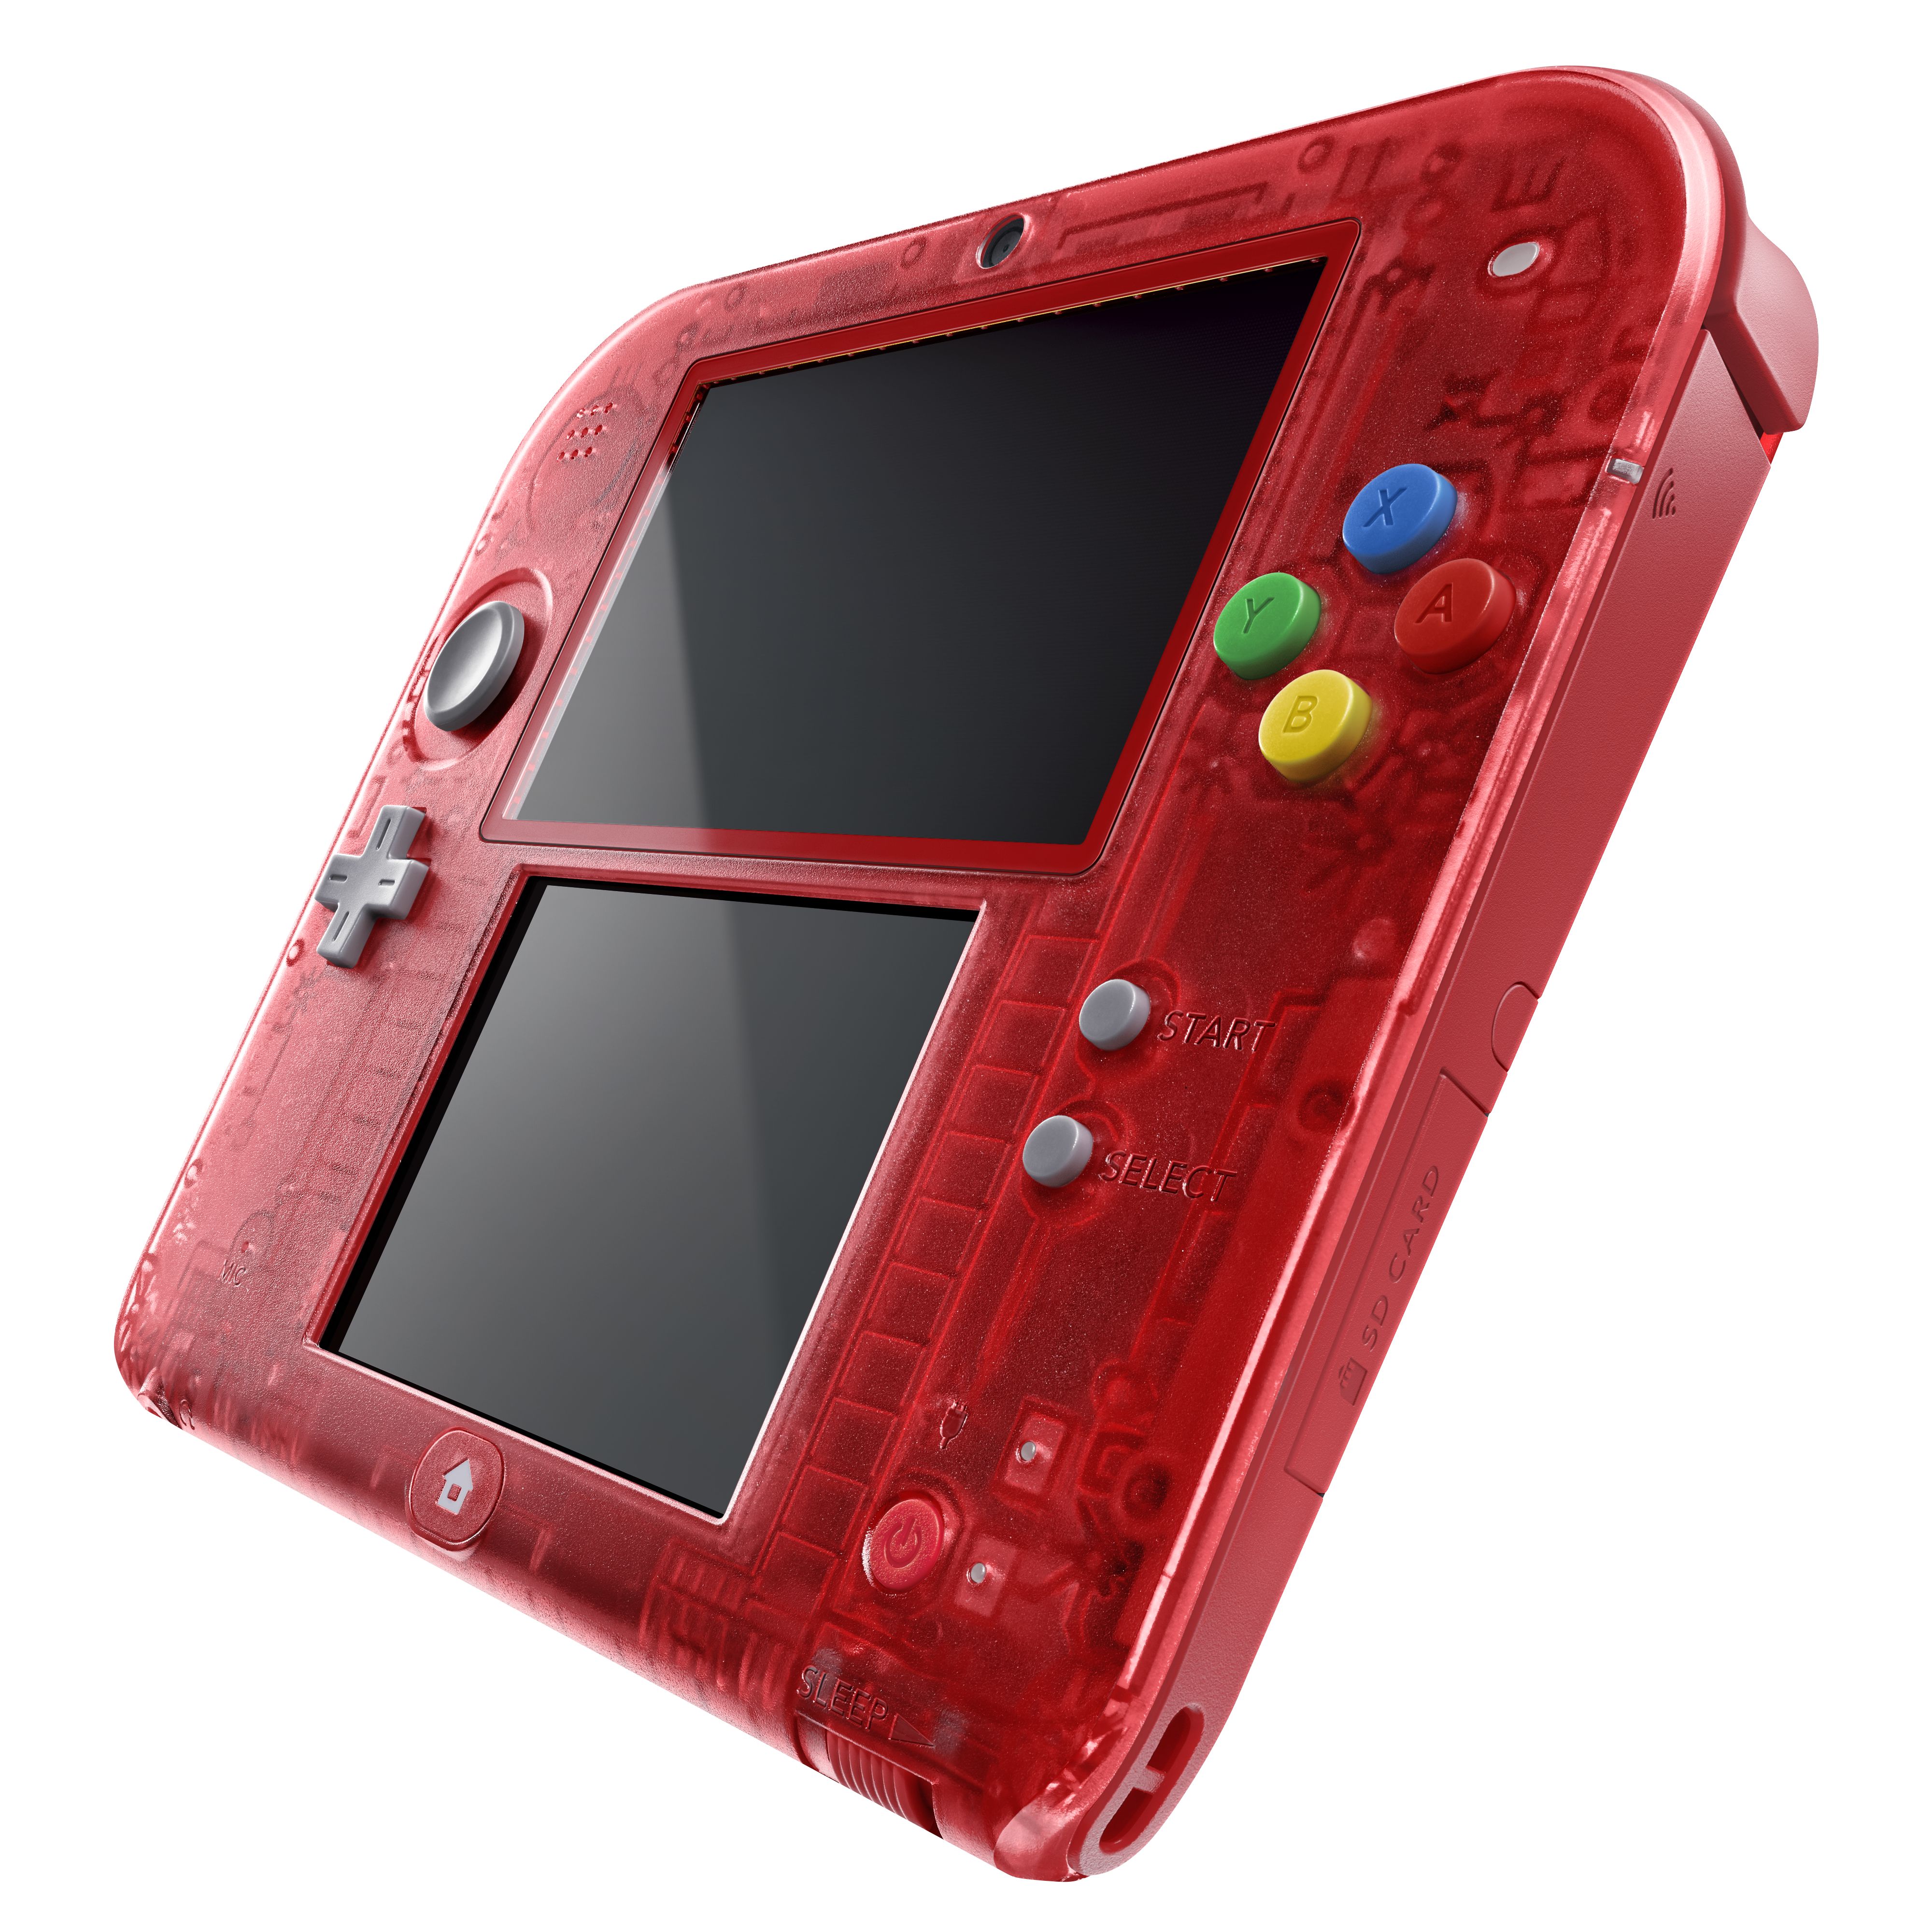 Should i buy my daughter the new 2ds?